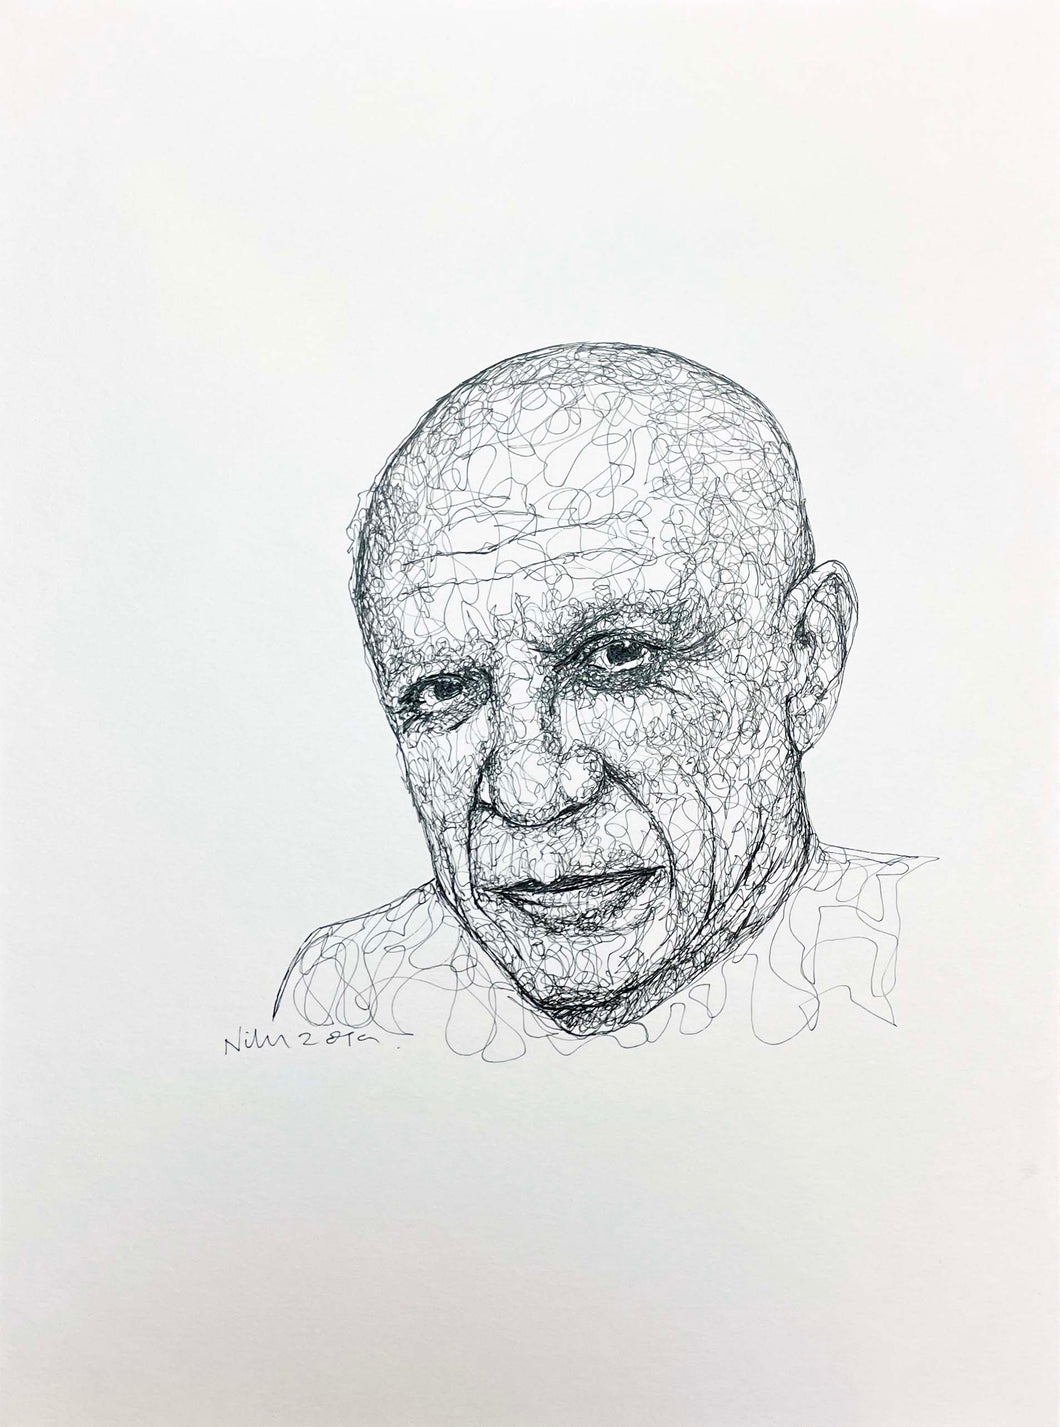 Niki Crafford - One Line Drawing - Pablo Picasso